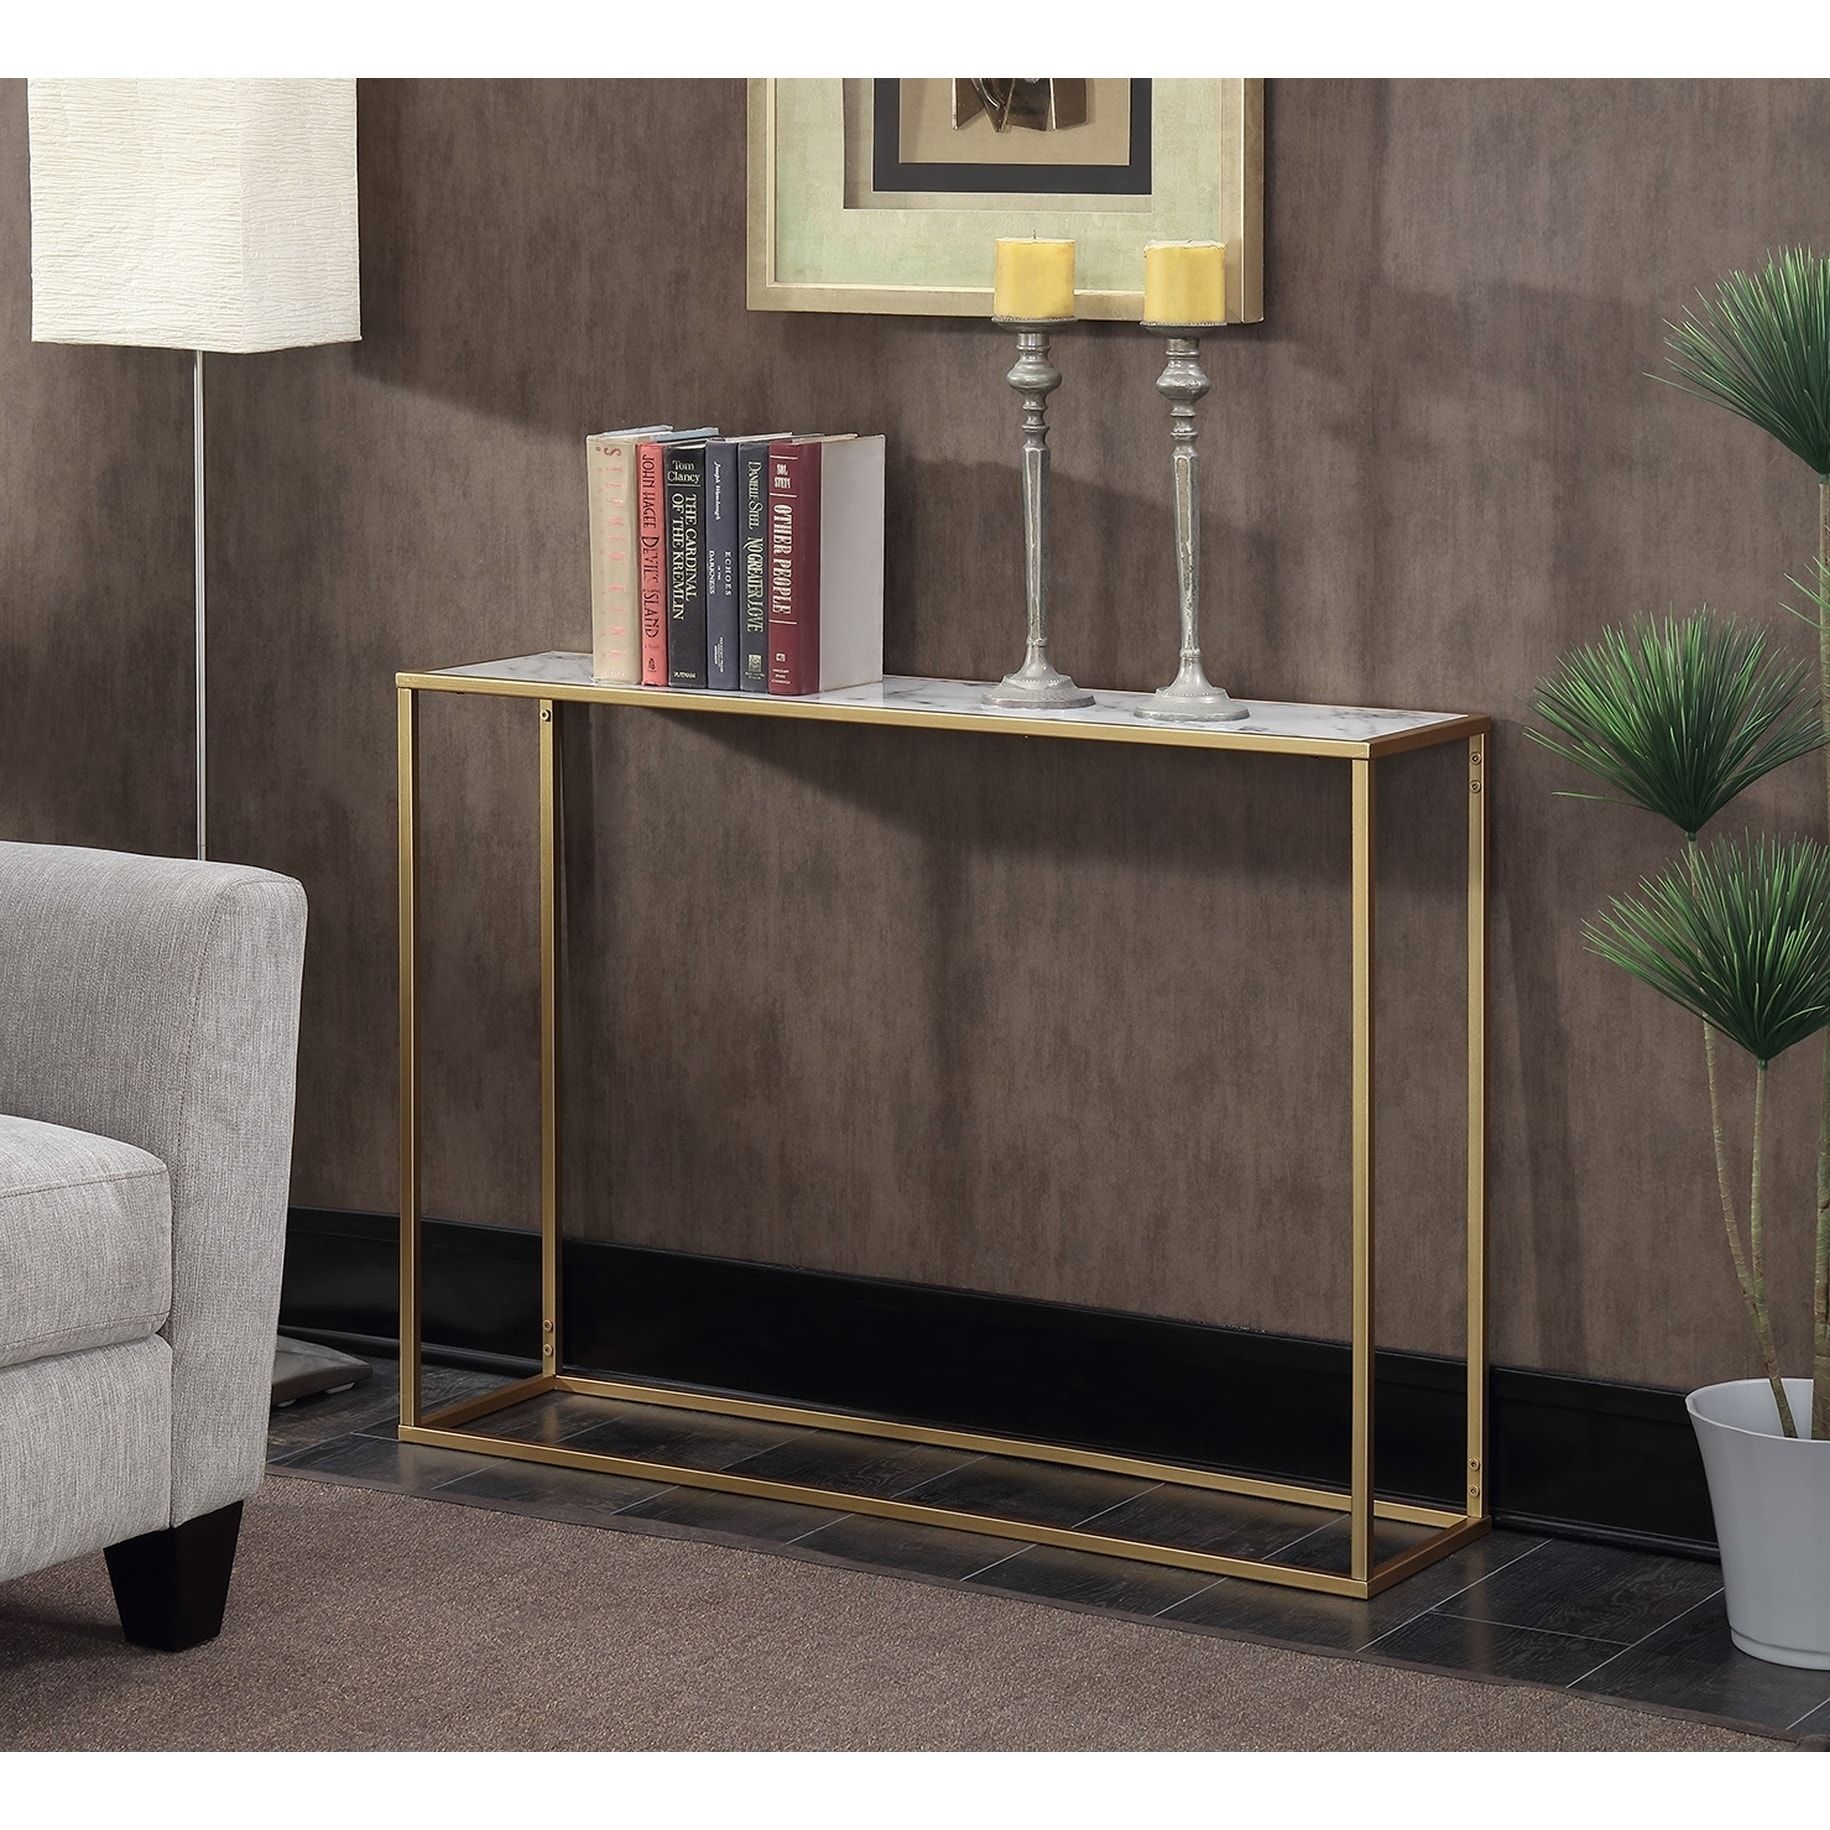 Shop Convenience Concepts Gold Coast Faux Marble Console Intended For Metallic Gold Console Tables (View 13 of 20)